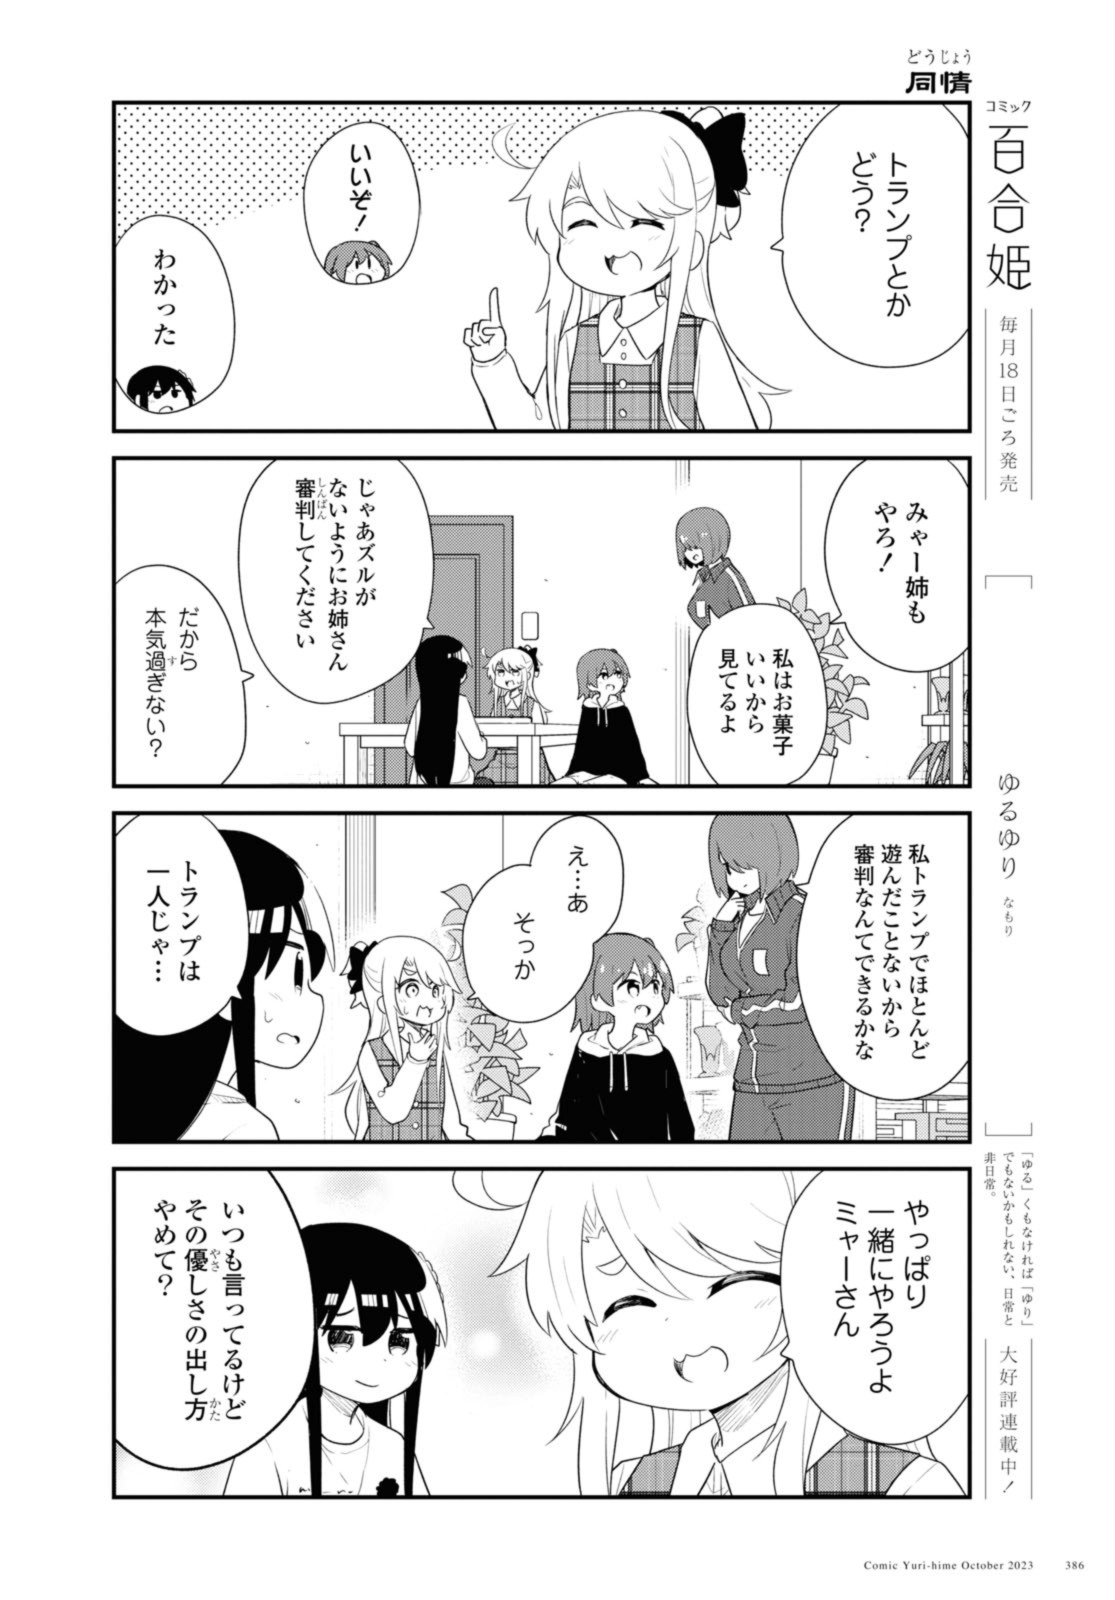 Wataten! An Angel Flew Down to Me 私に天使が舞い降りた！ 第109話 - Page 6